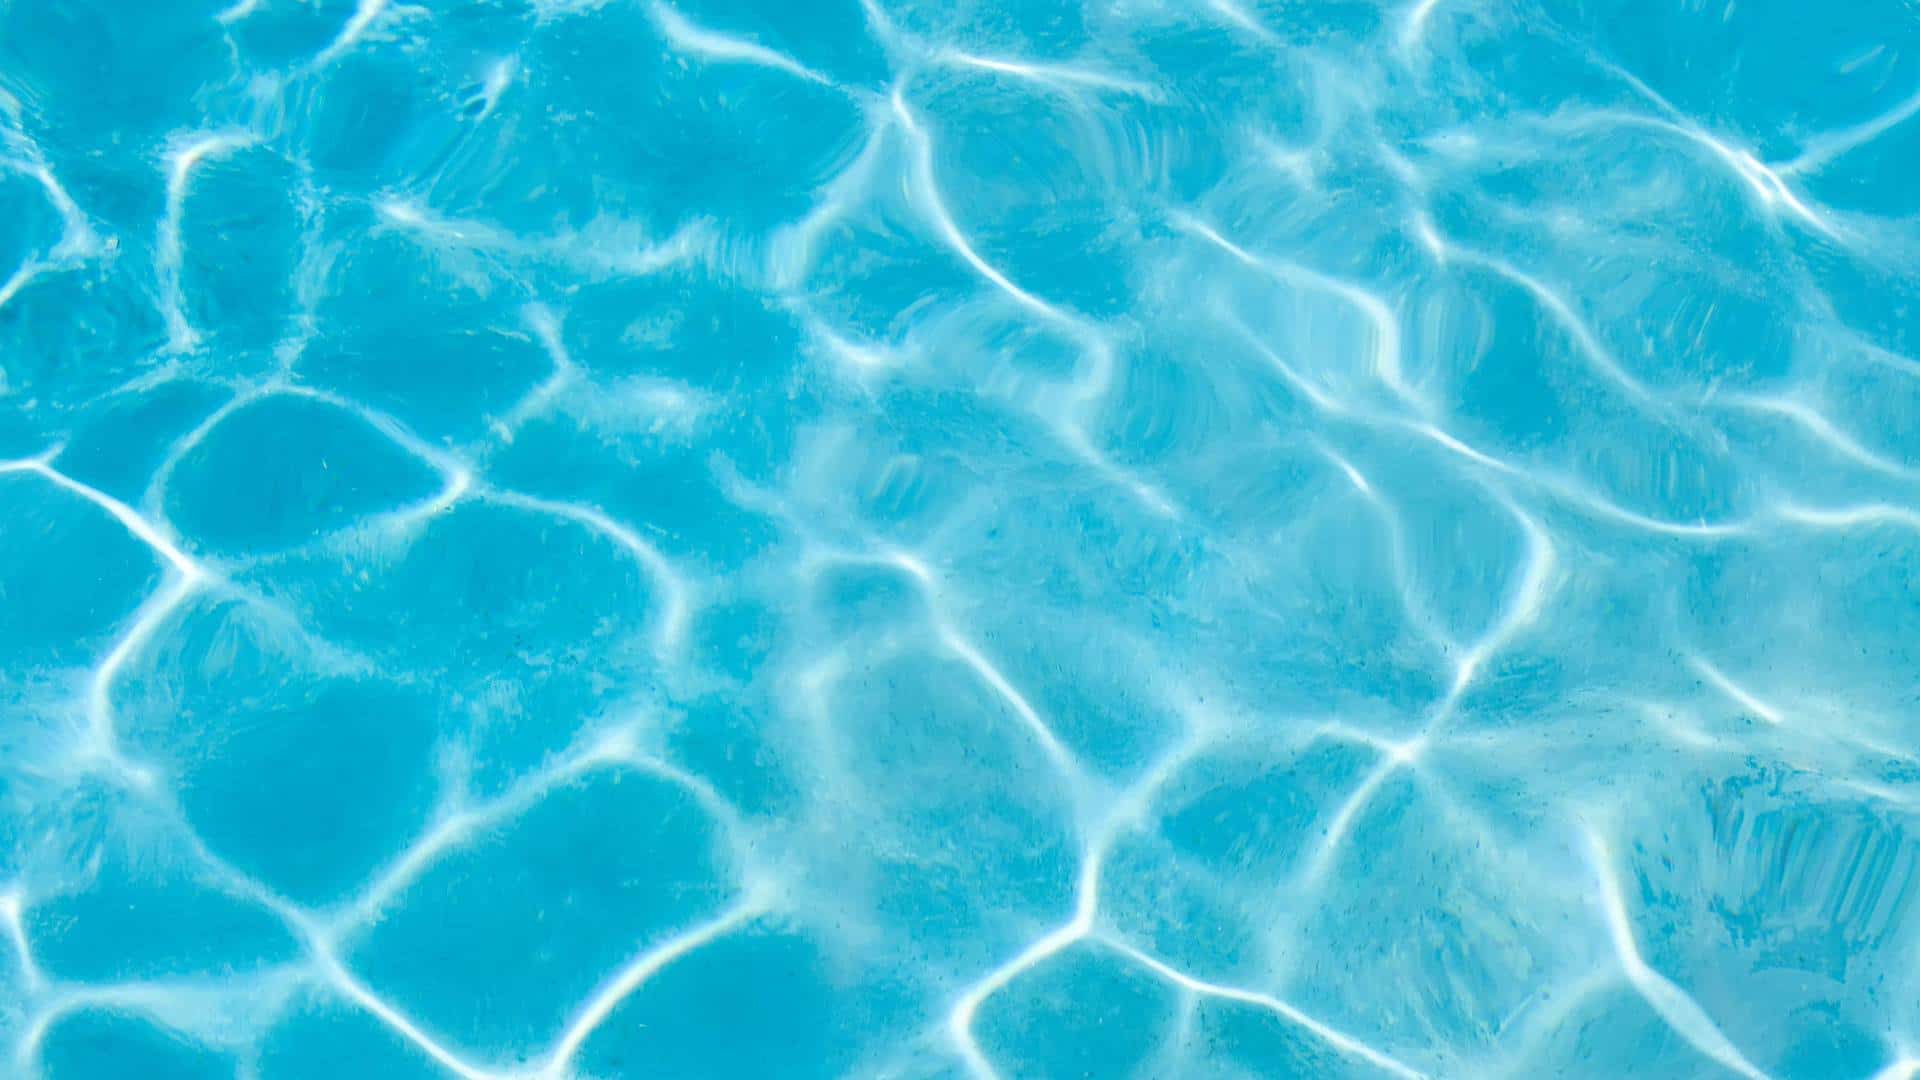 Water Background Image